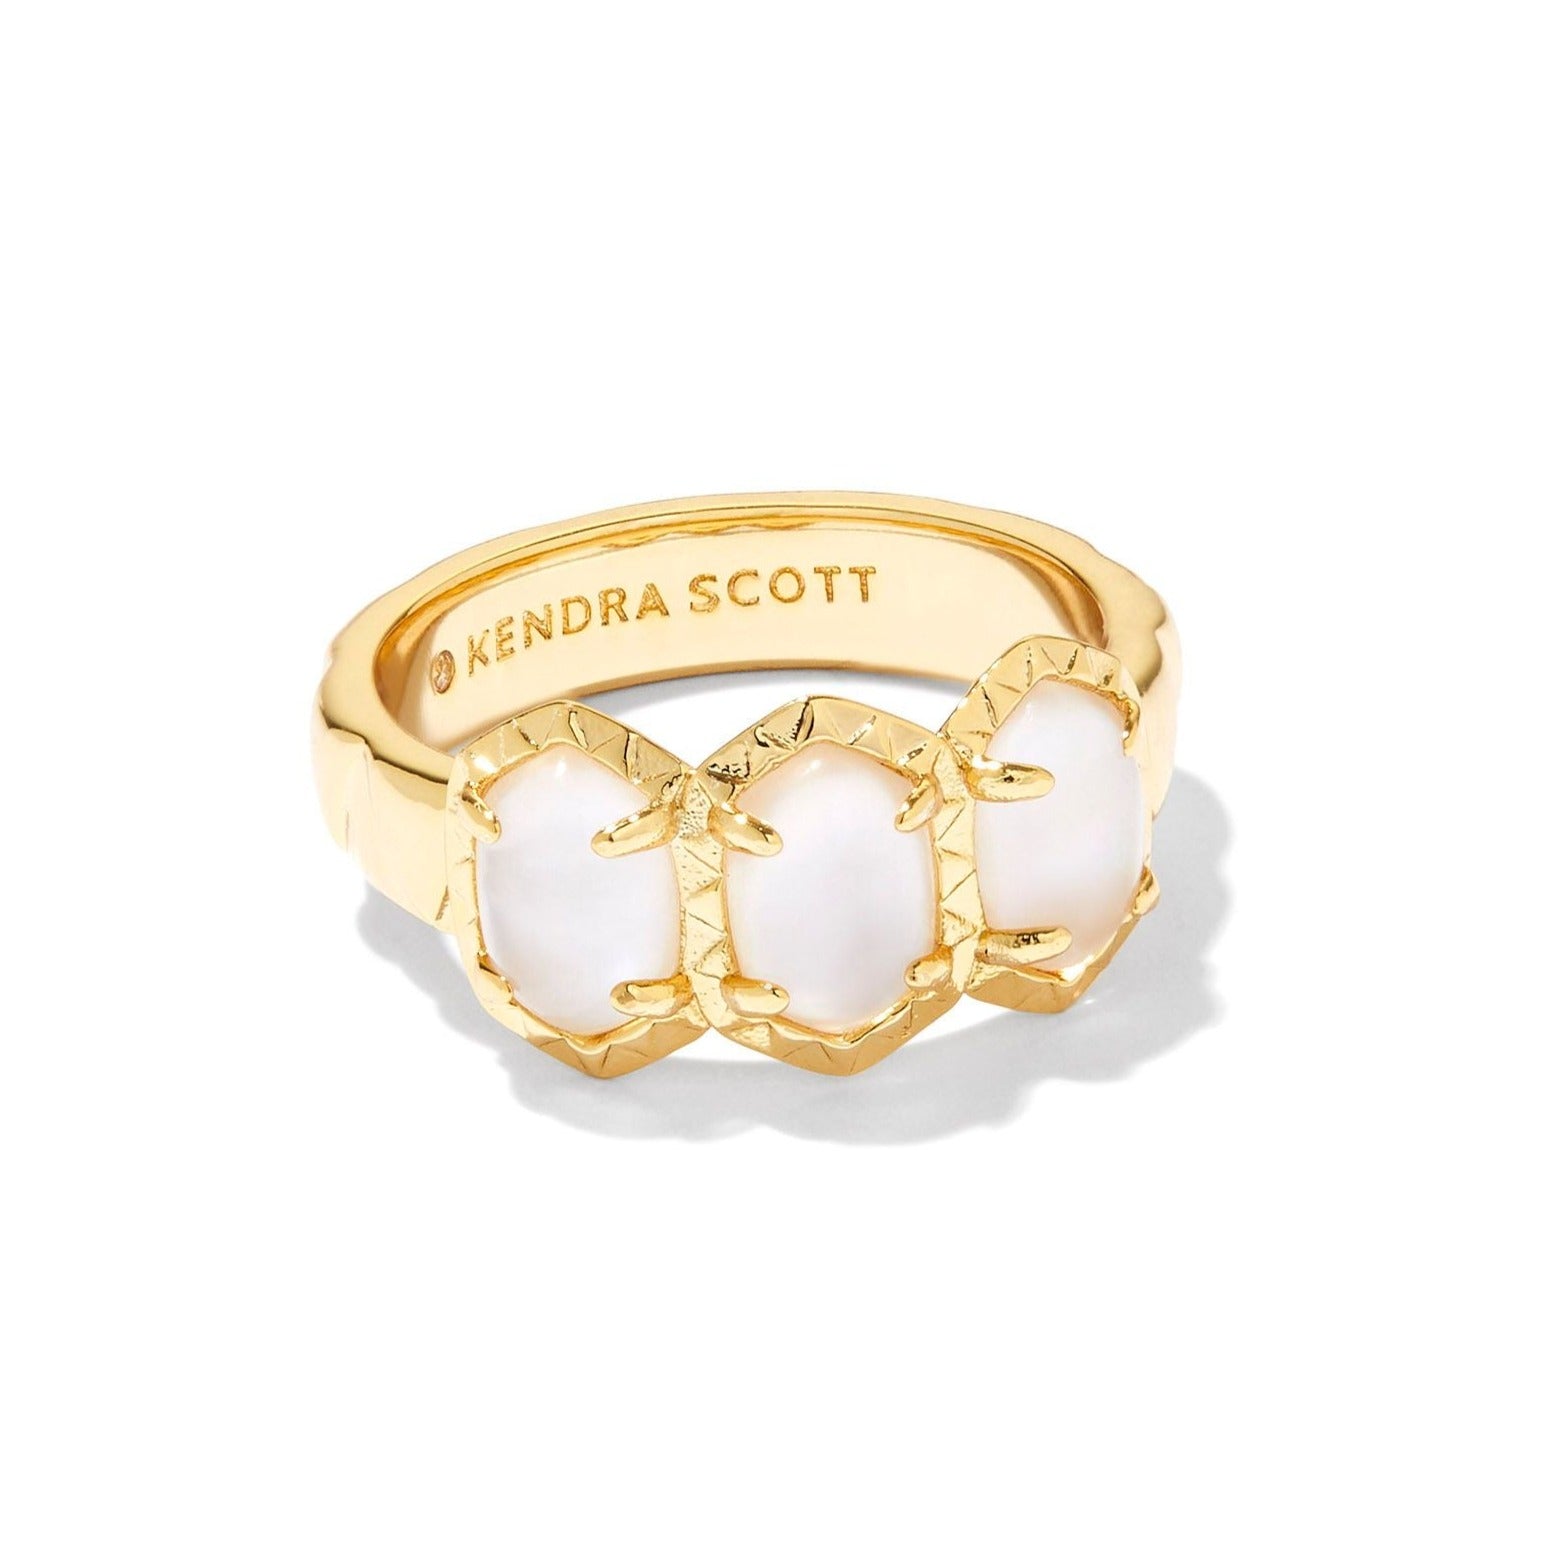 Kendra Scott | Daphne Gold Band Ring in Ivory Mother of Pearl - Giddy Up Glamour Boutique